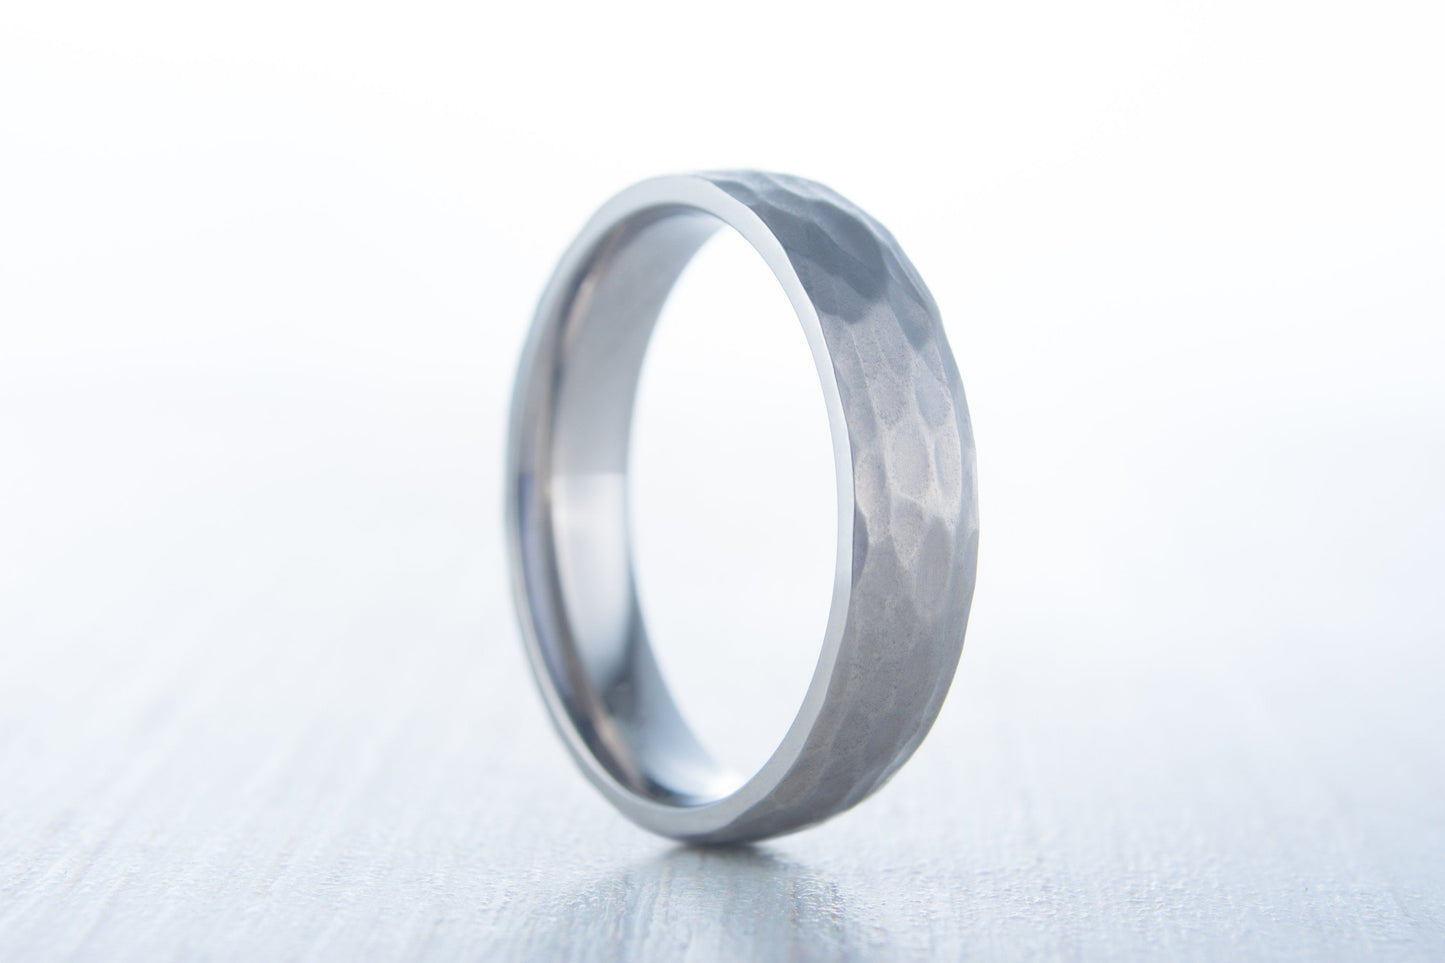 5mm Hammered finish Titanium Wedding ring band for men and women